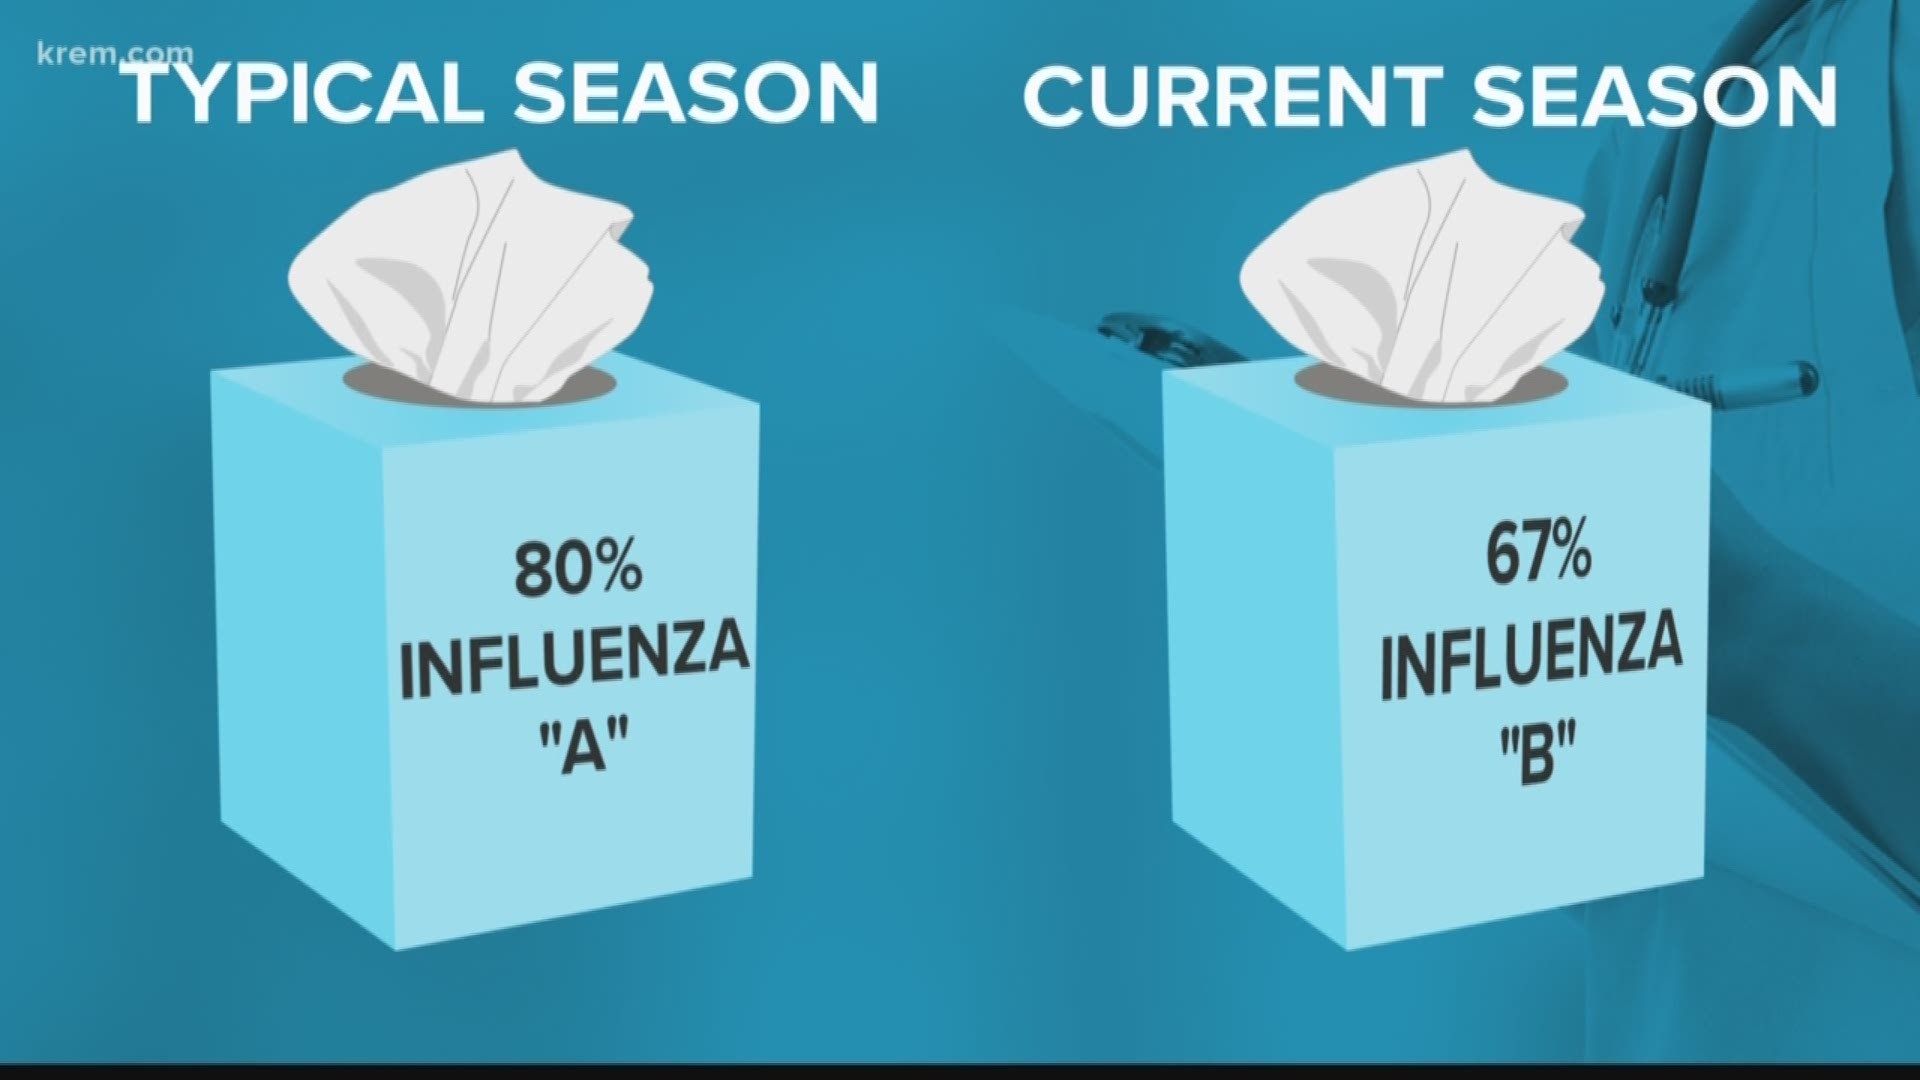 This year's flu season seems to have double the amount of questions.